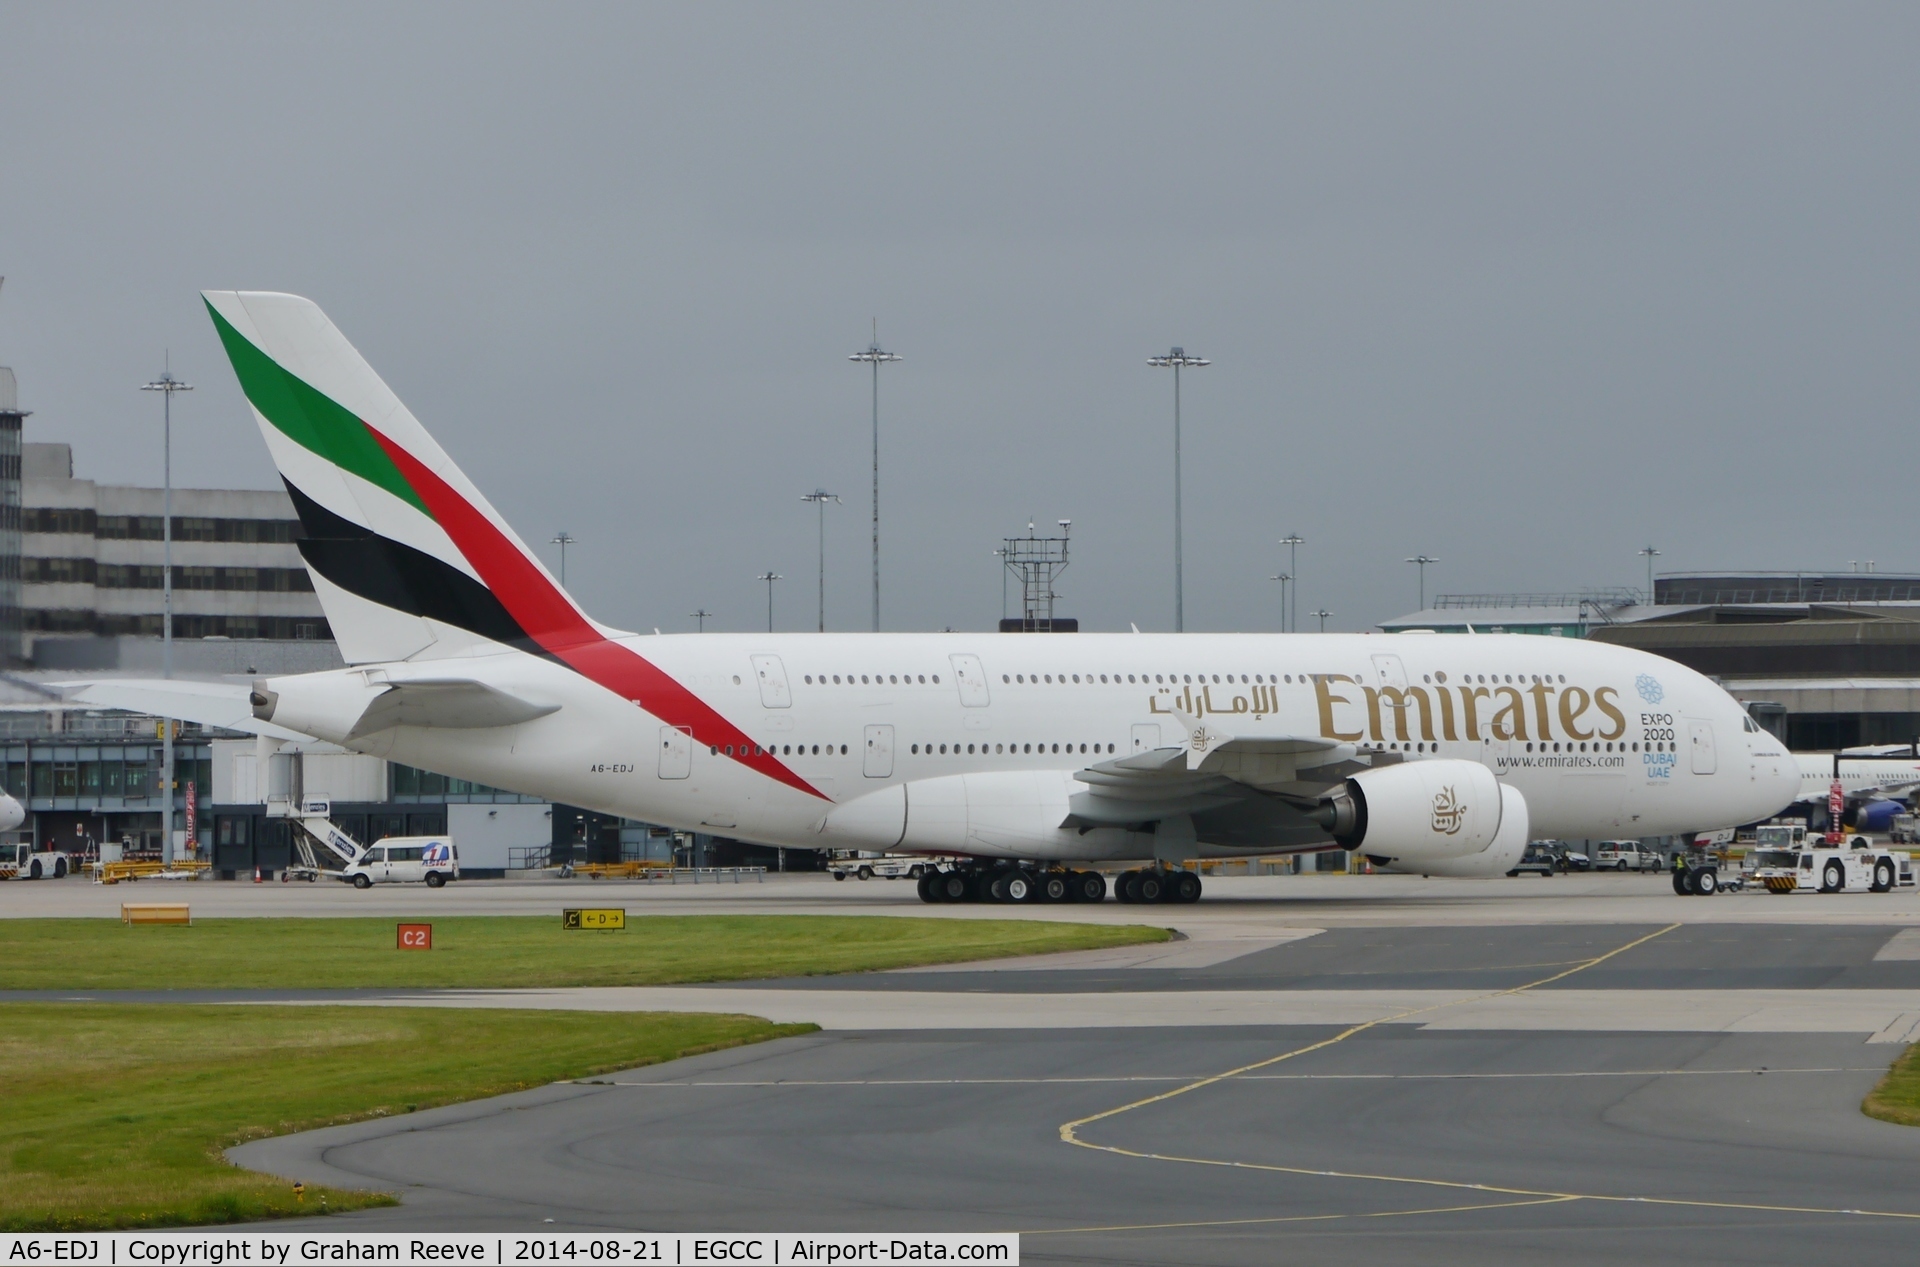 A6-EDJ, 2006 Airbus A380-861 C/N 009, Being pushed back ready for departure.